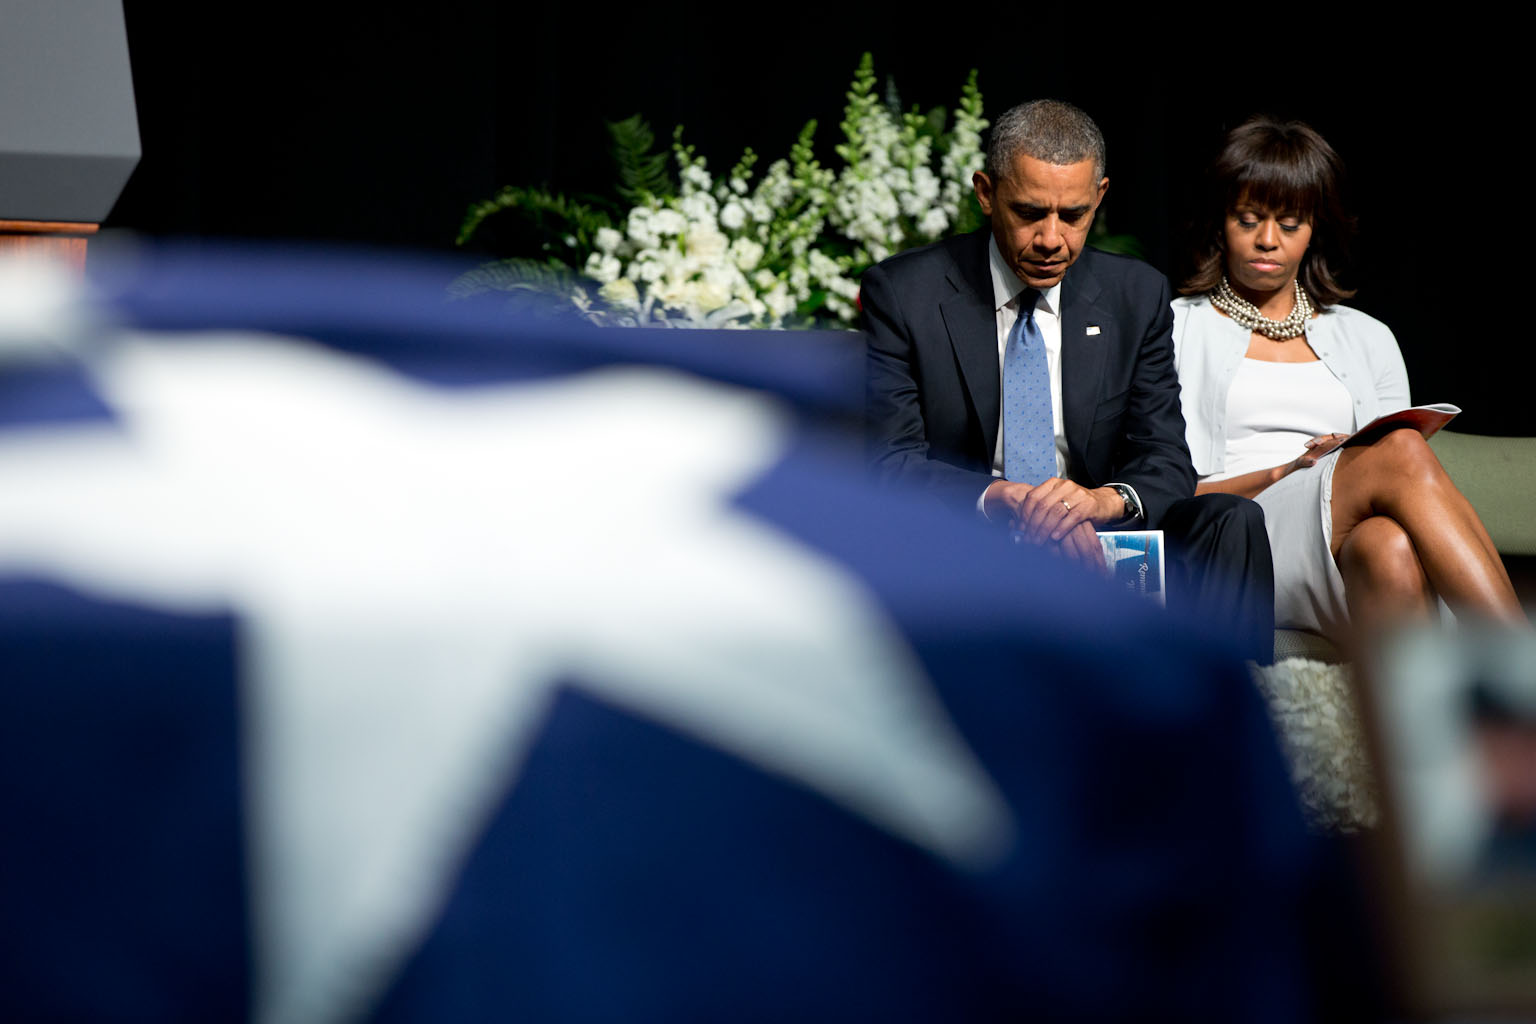 President Barack Obama and First Lady Michelle Obama attend a memorial service at Baylor University